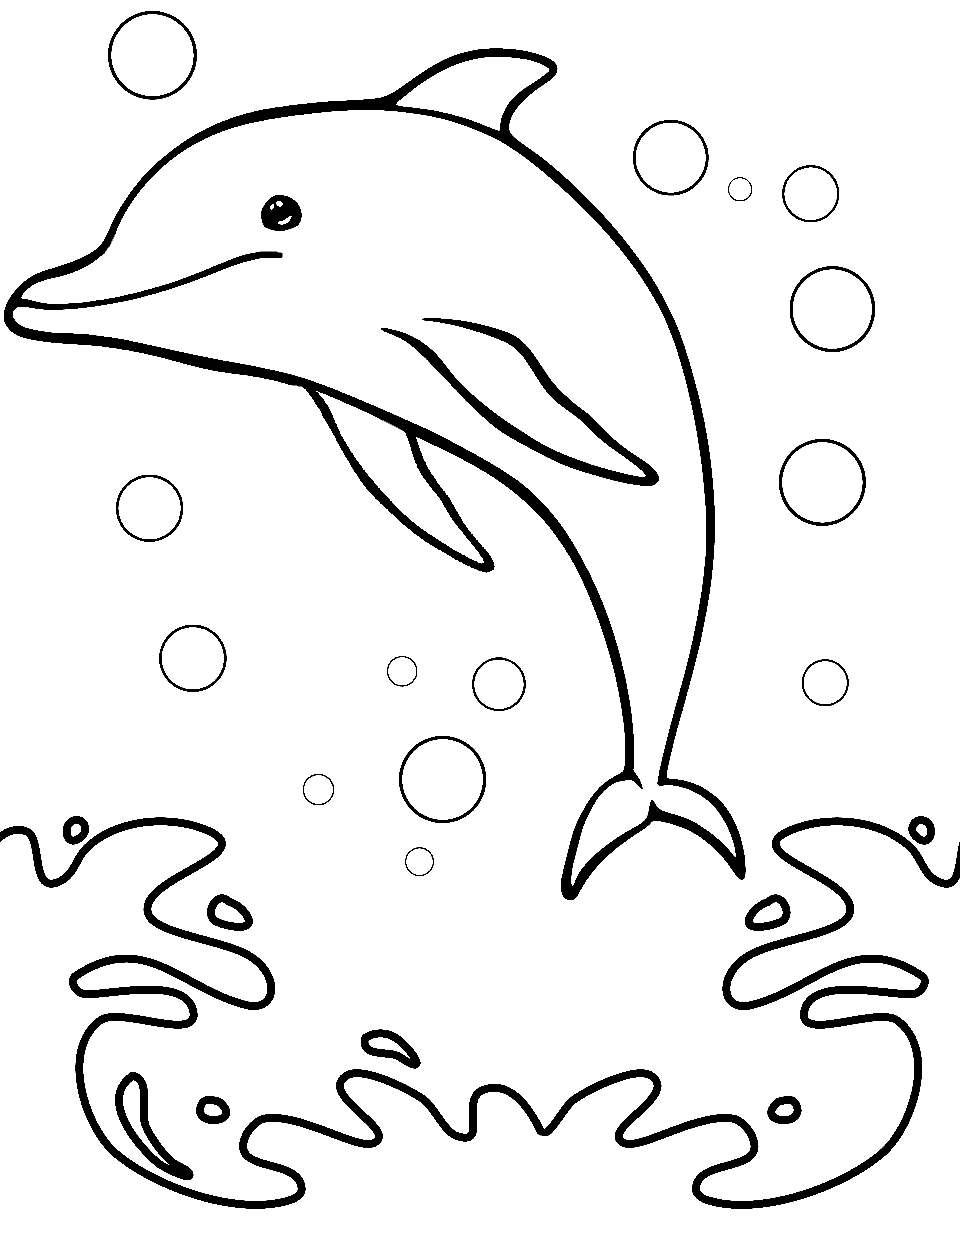 Coloring Page Cute Cartoon Dolphin Educational Stock Vector (Royalty Free)  2300297747 | Shutterstock